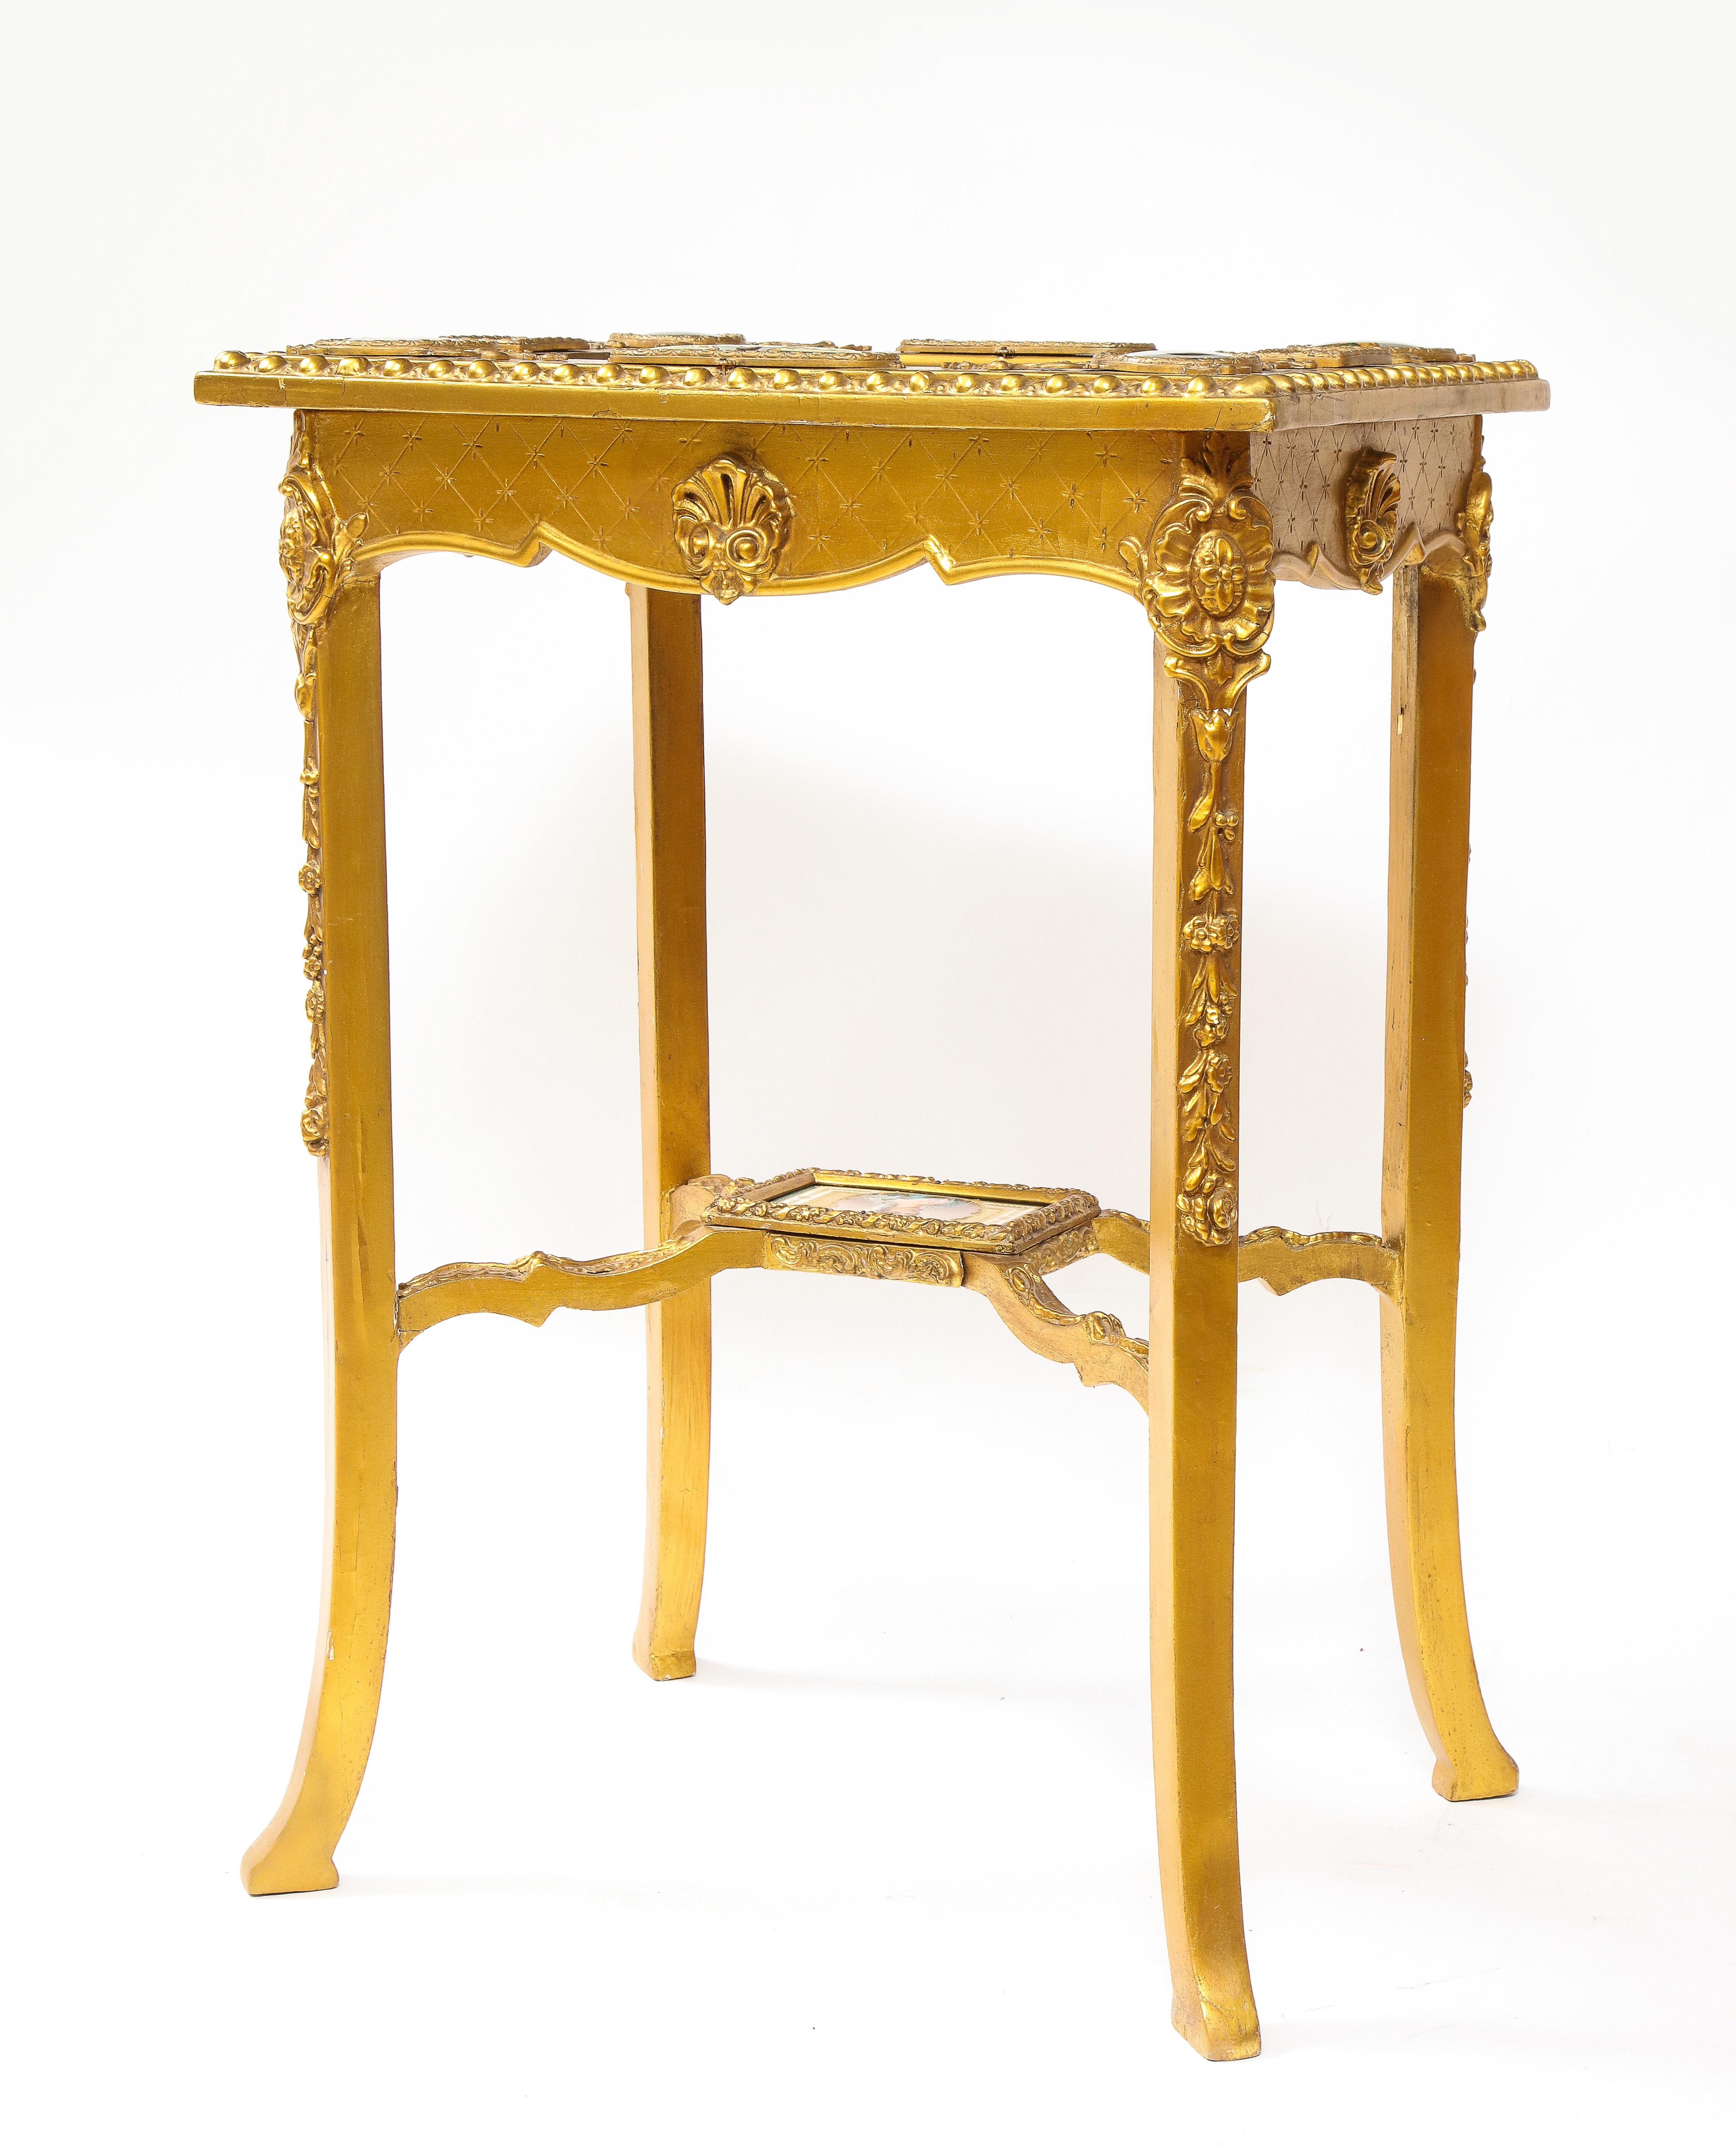 19th C. Napoleonic Royal Vienna Giltwood Side Table w/ Inlaid Porcelain Plaques In Good Condition For Sale In New York, NY